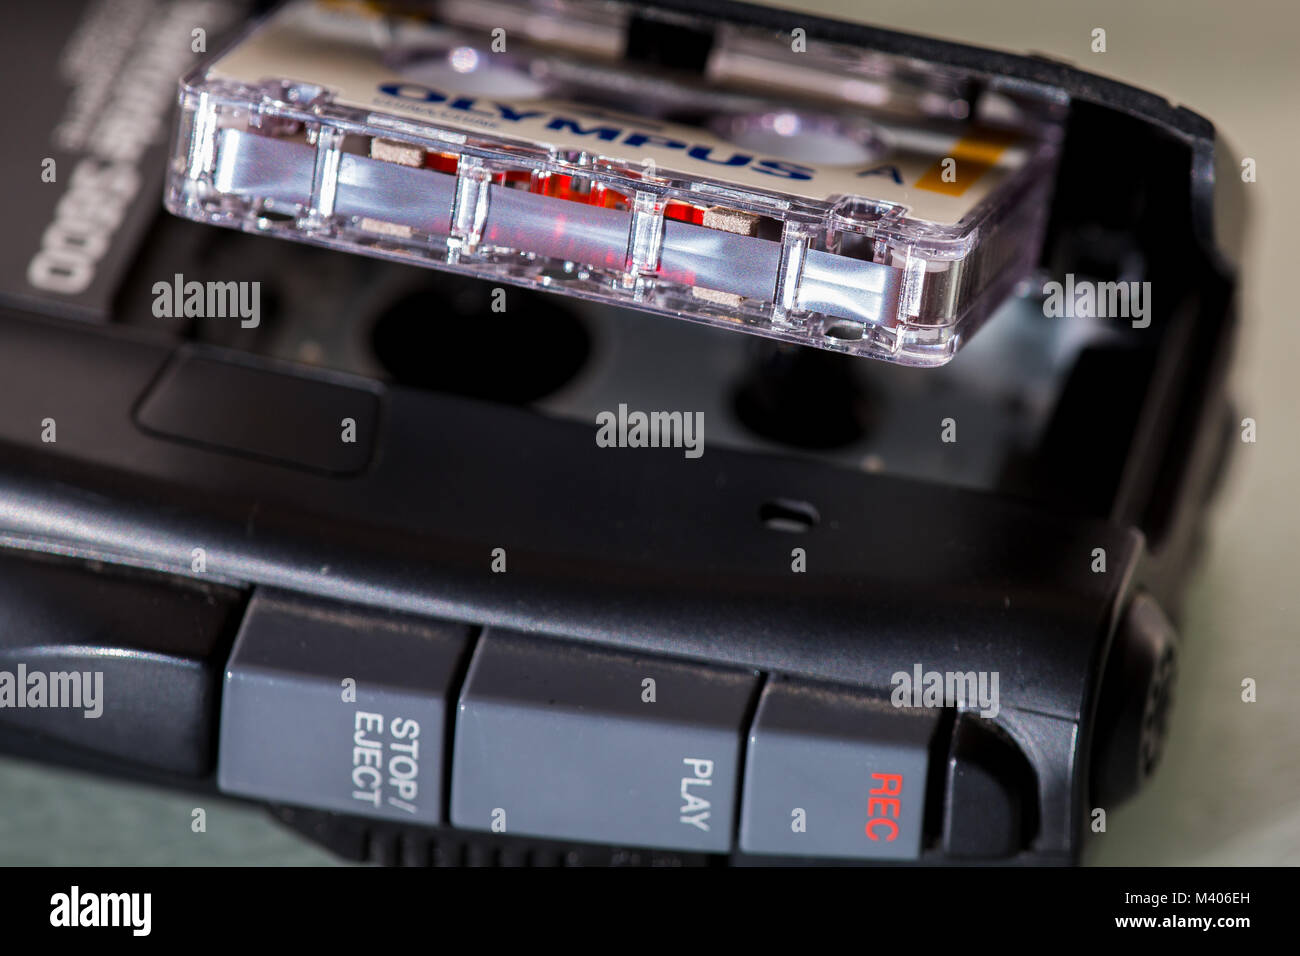 Olympus Pearlcorder s600 Microcassette Recorder and Microcassette Stock Photo